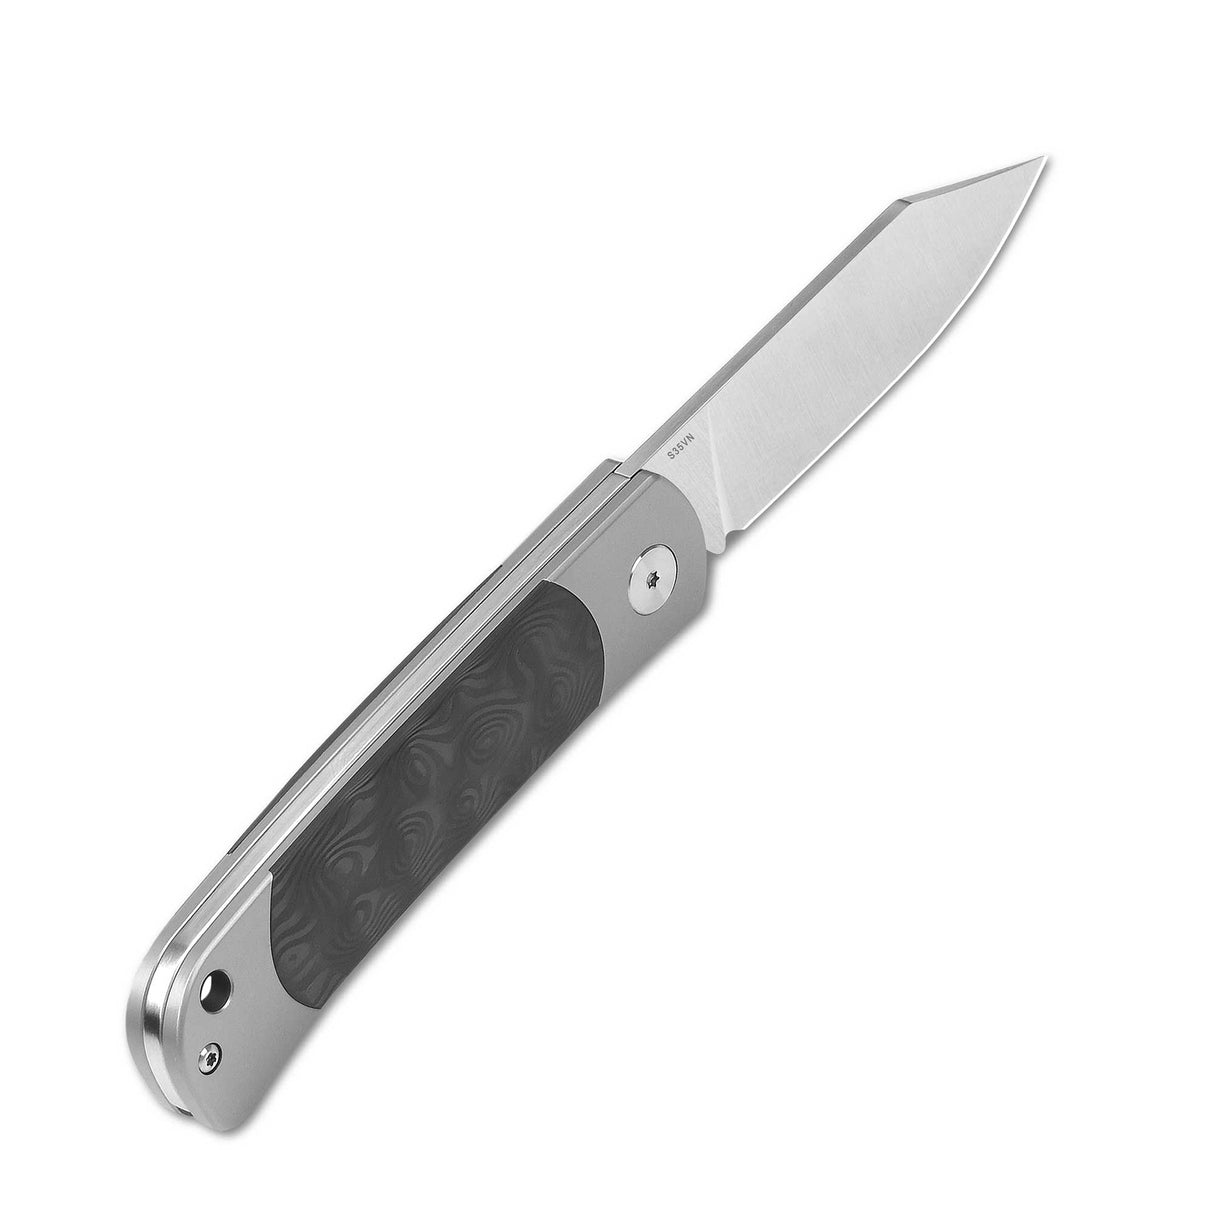 QSP Falcon Slip Joint Pocket Knife S35VN Blade Titanium with Marbled CF Insert Handle